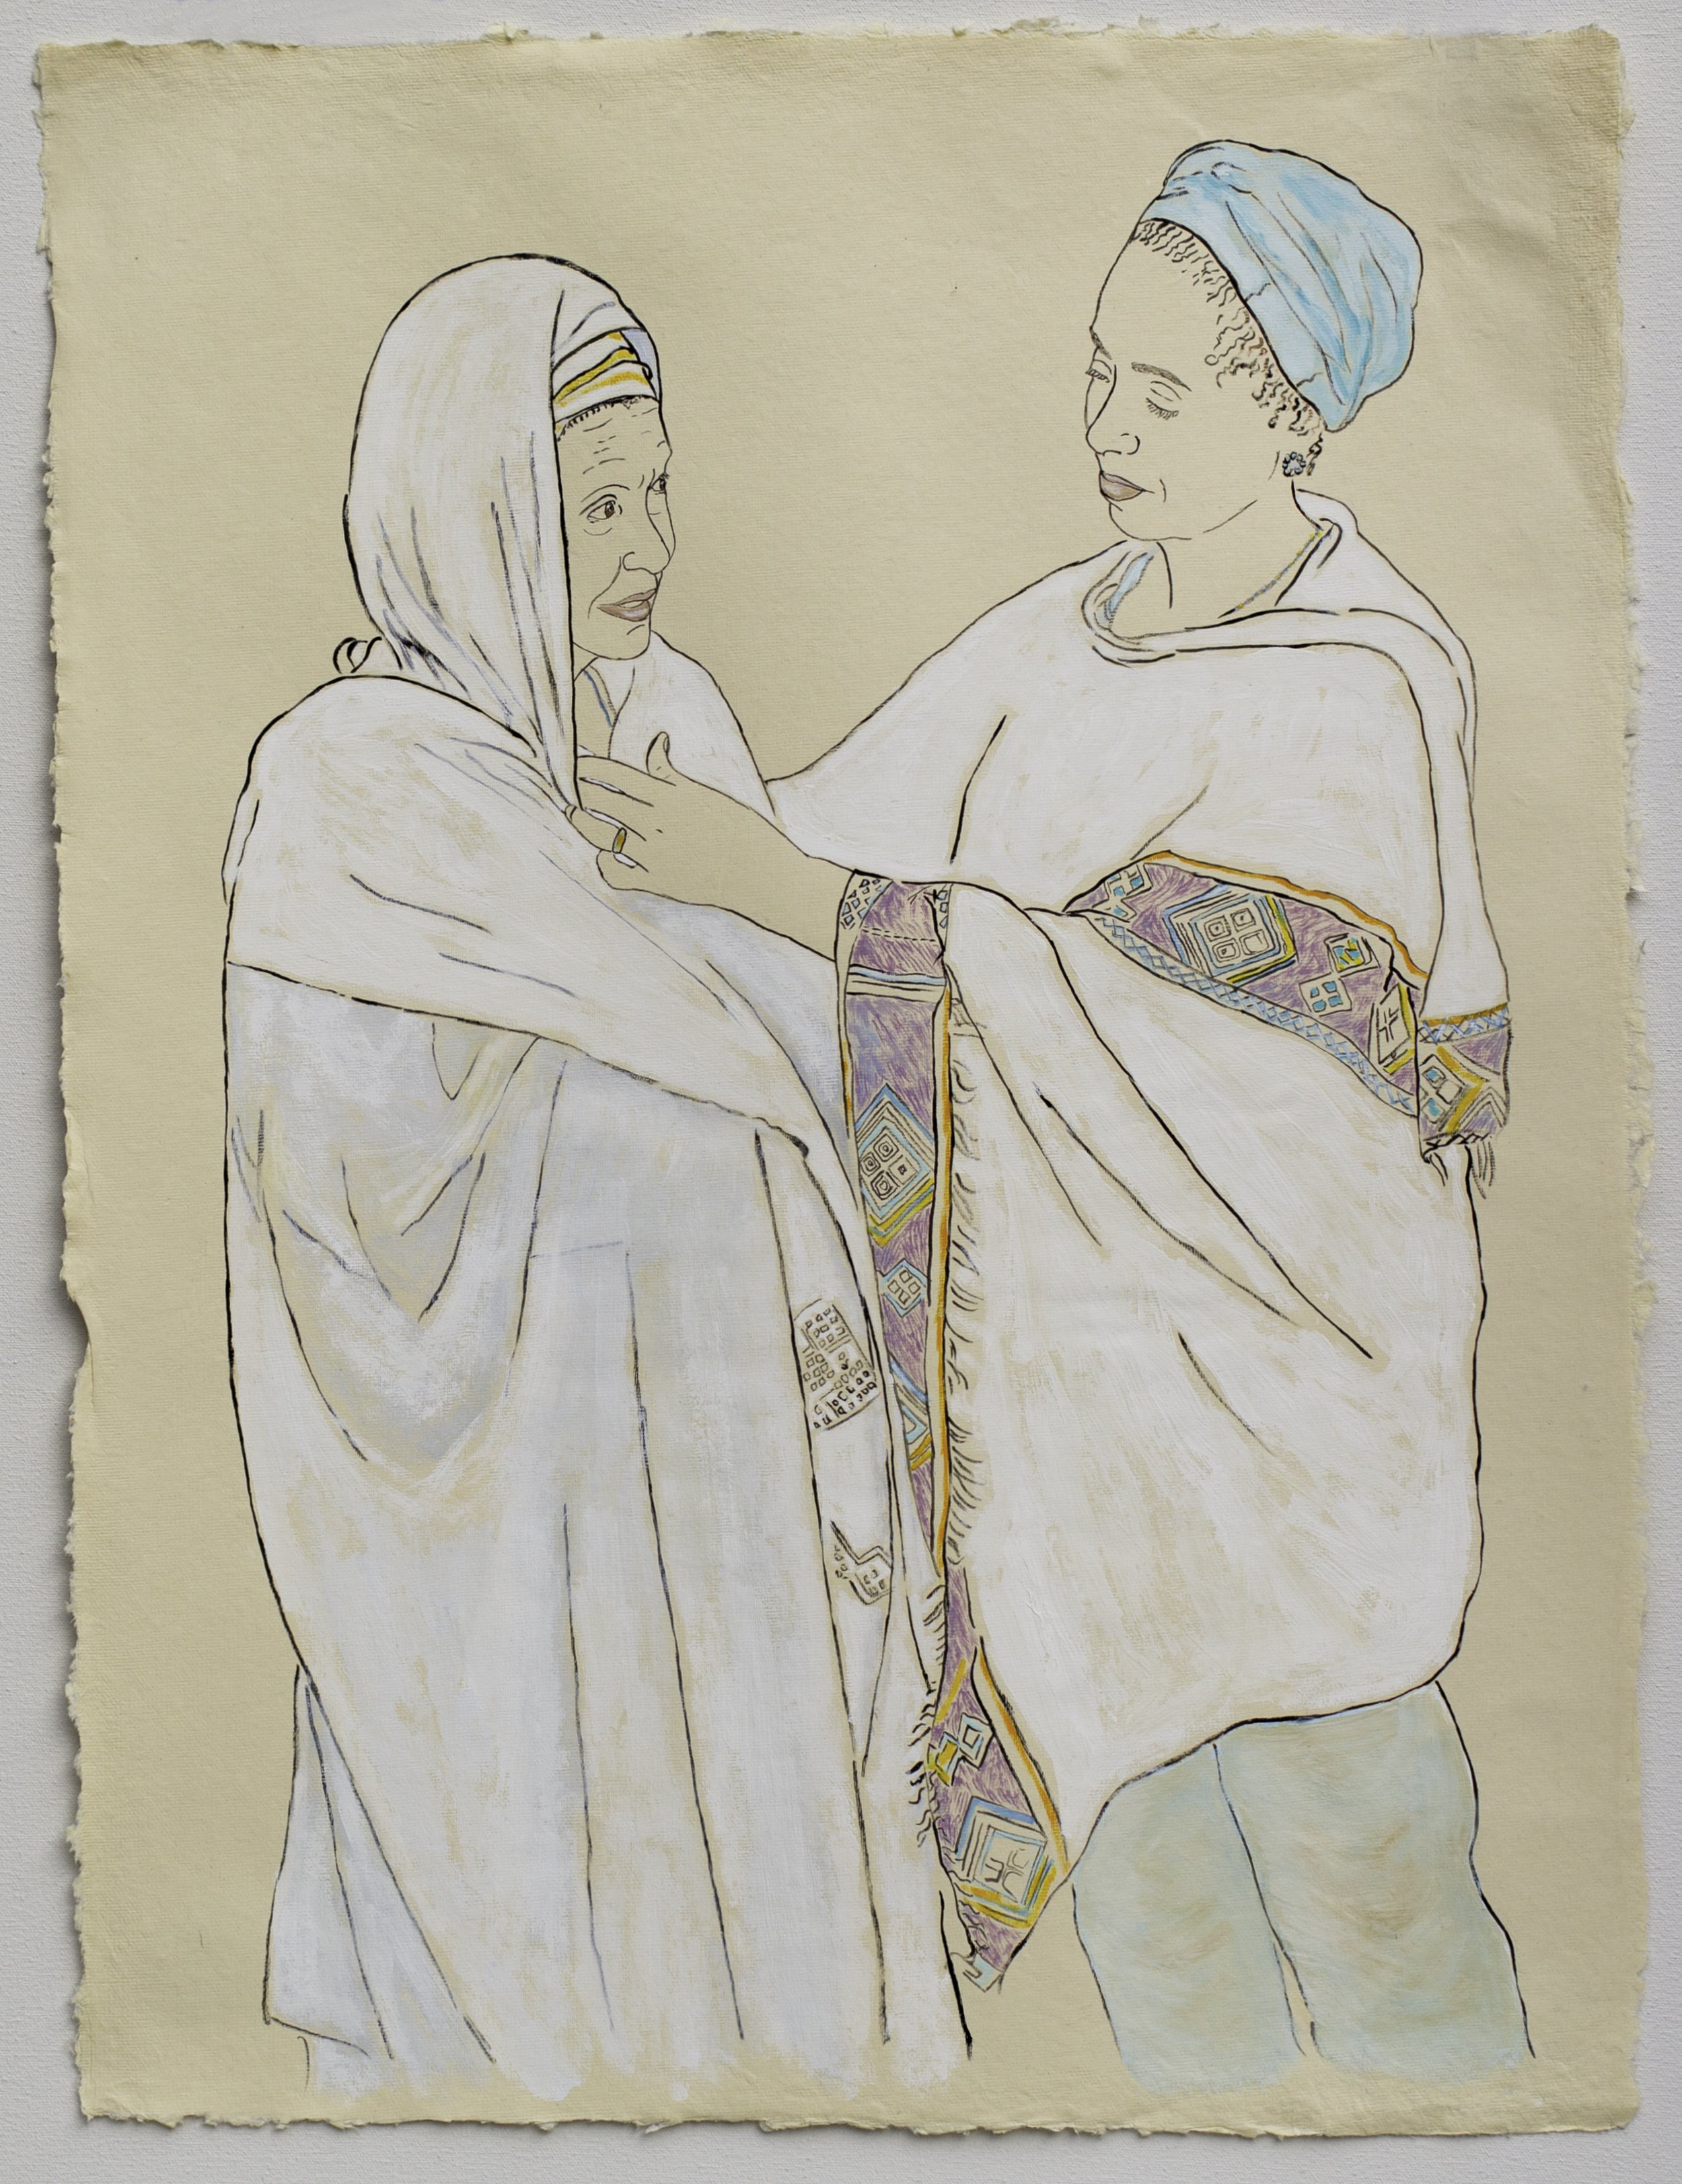   Available    Ethiopian Community: Woman and Her Mother   25” x 19”, gouache, watercolor, India Ink on paper, 2021 